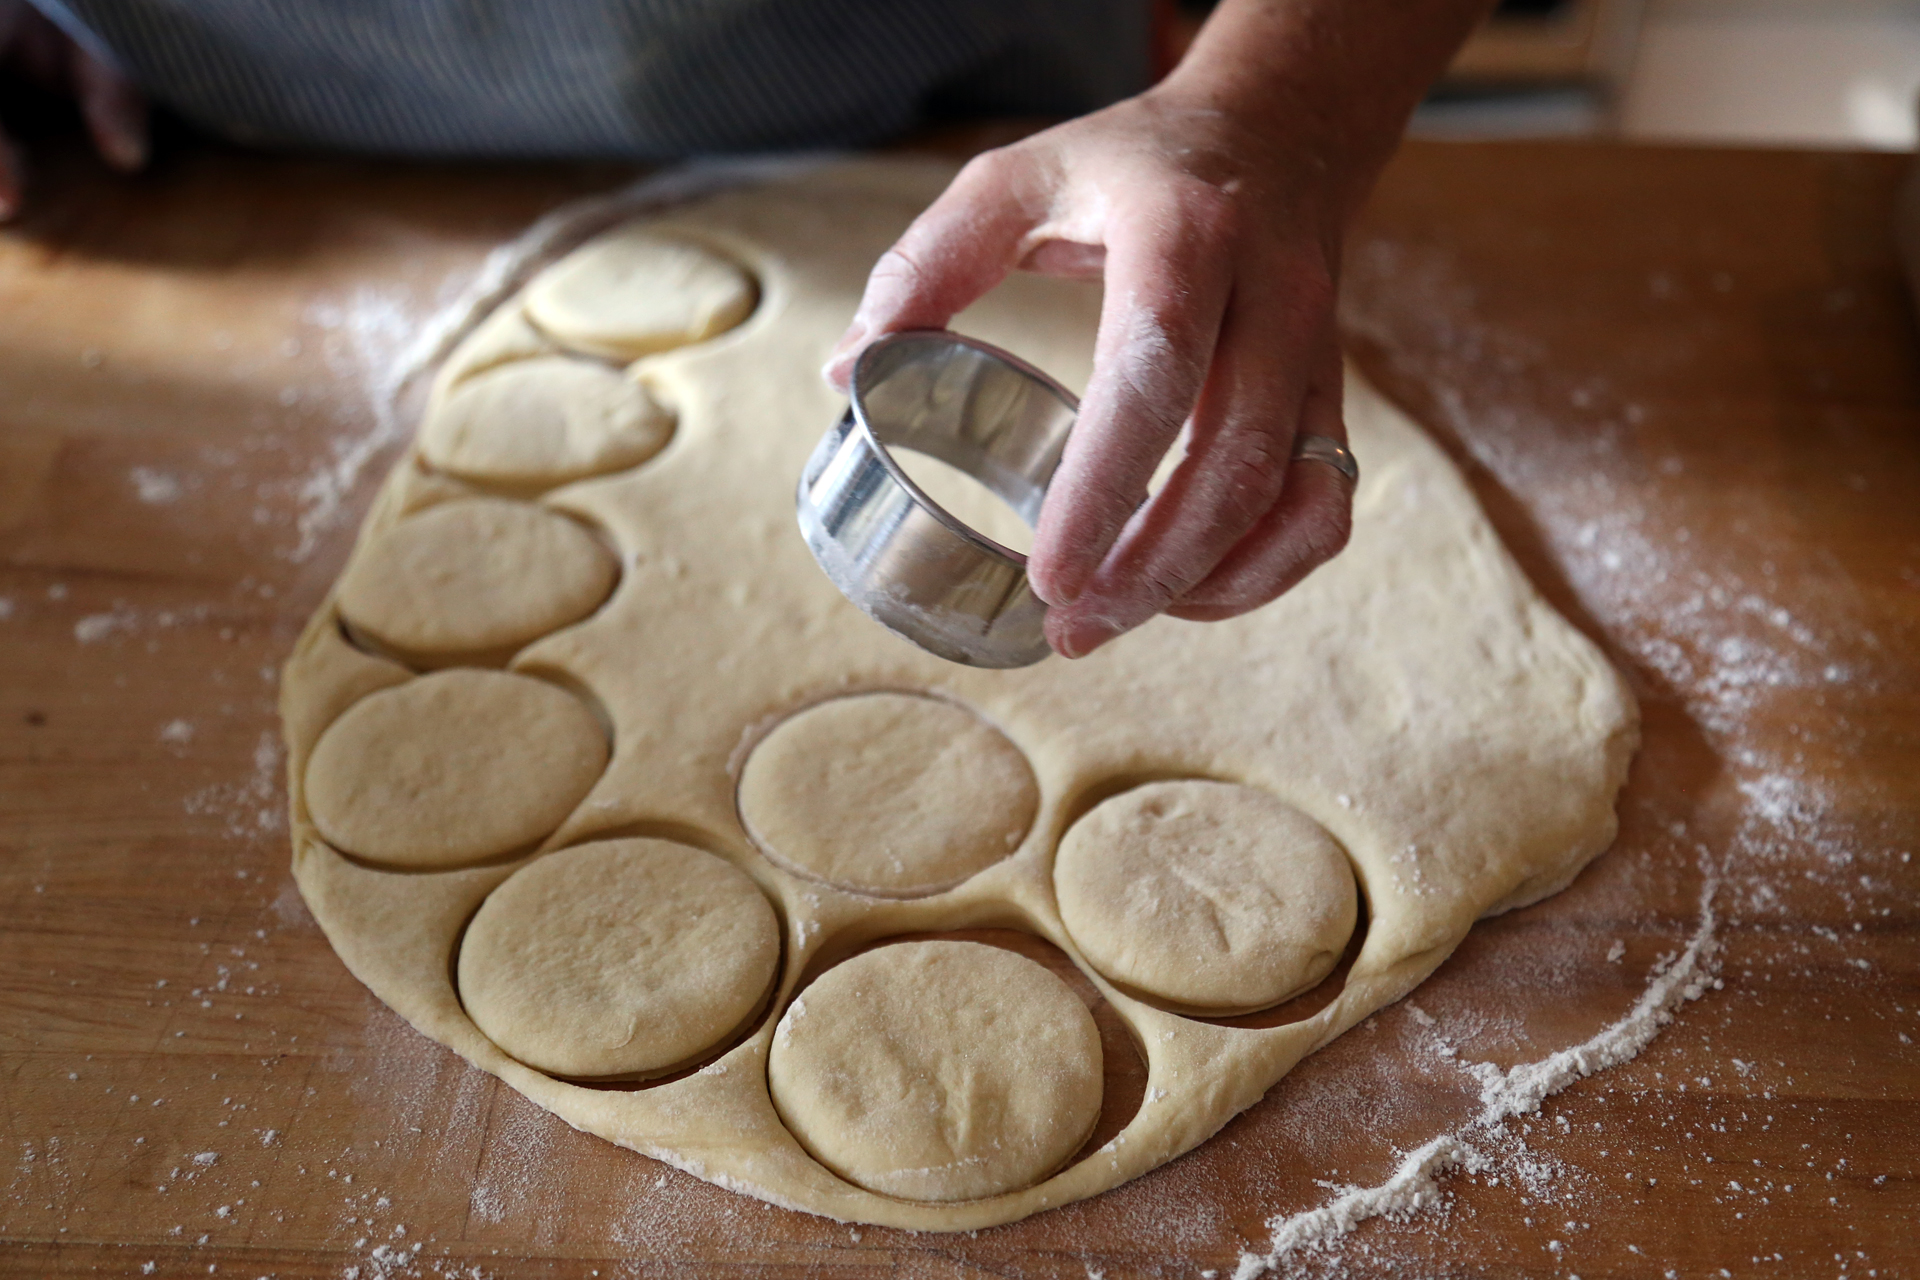 With a 2-inch round biscuit or cookie cutter, cut out as many rounds of dough as you can. 